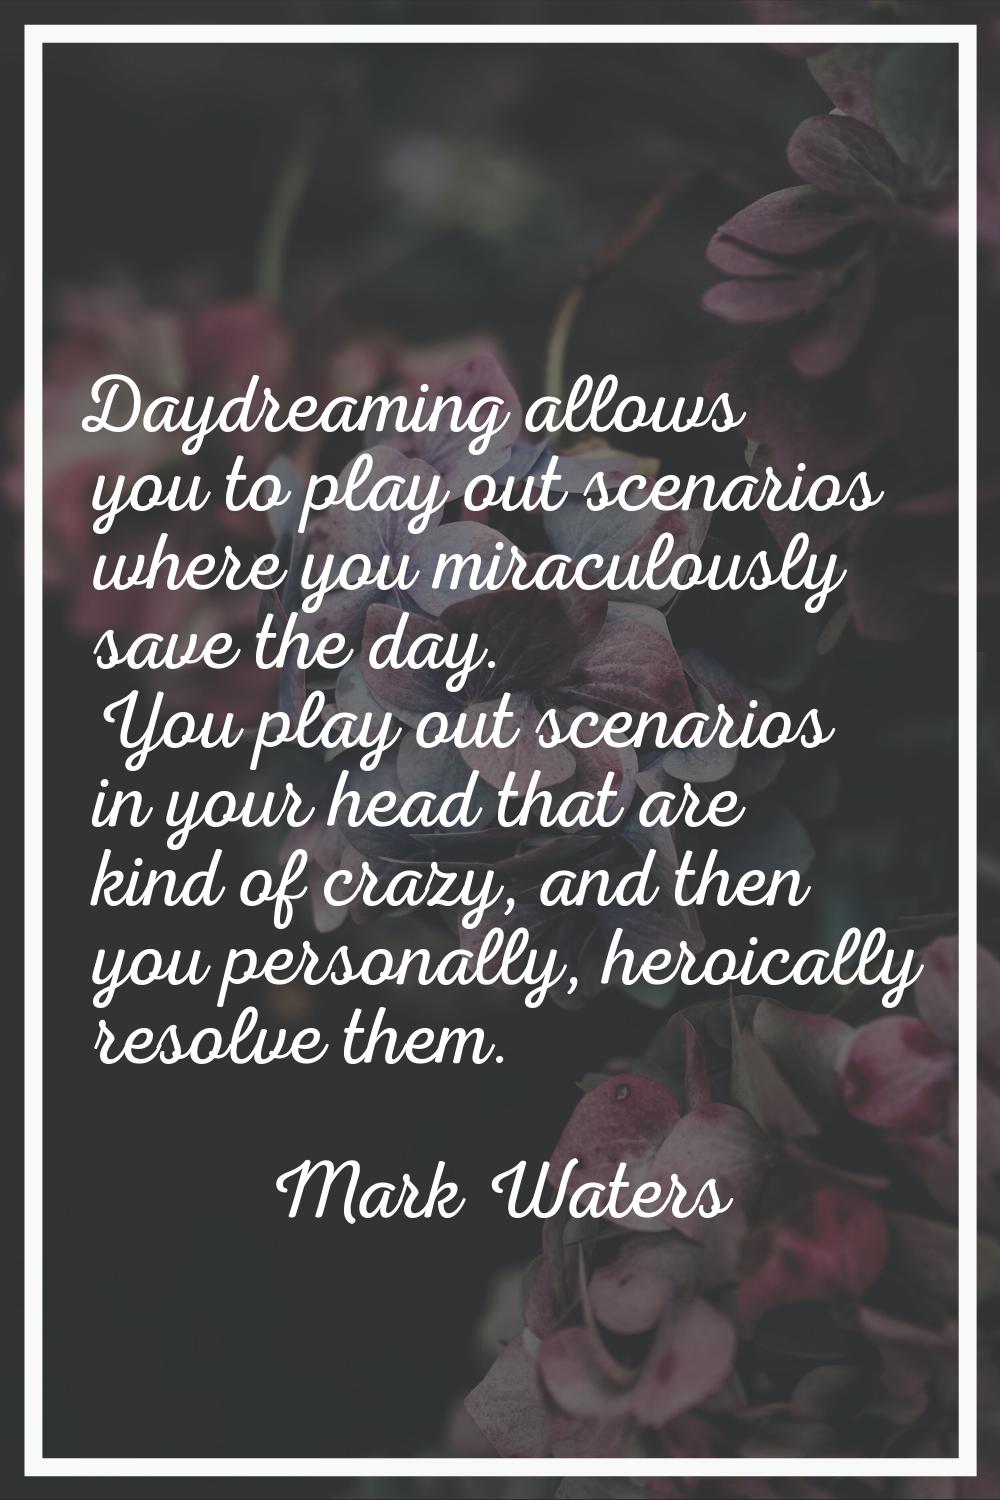 Daydreaming allows you to play out scenarios where you miraculously save the day. You play out scen